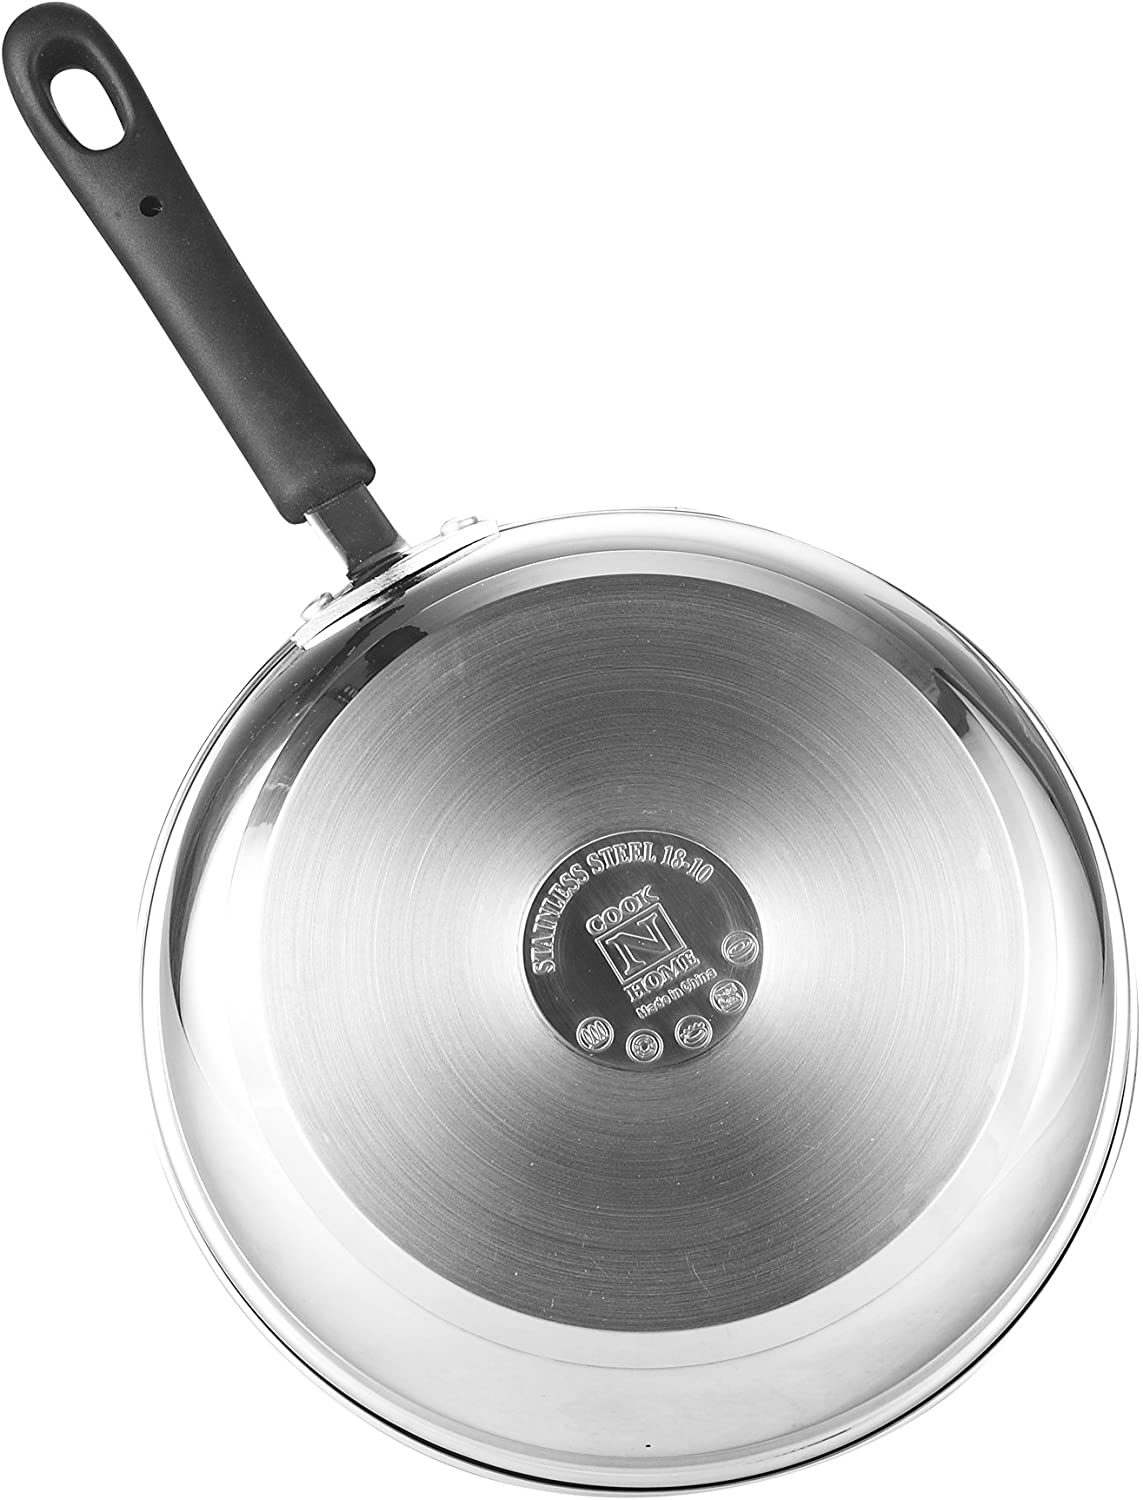 All-Clad 4201 Stainless Steel Tri-Ply Bonded Sauce Pan with Lid / Cookware,  1-Quart, Silver